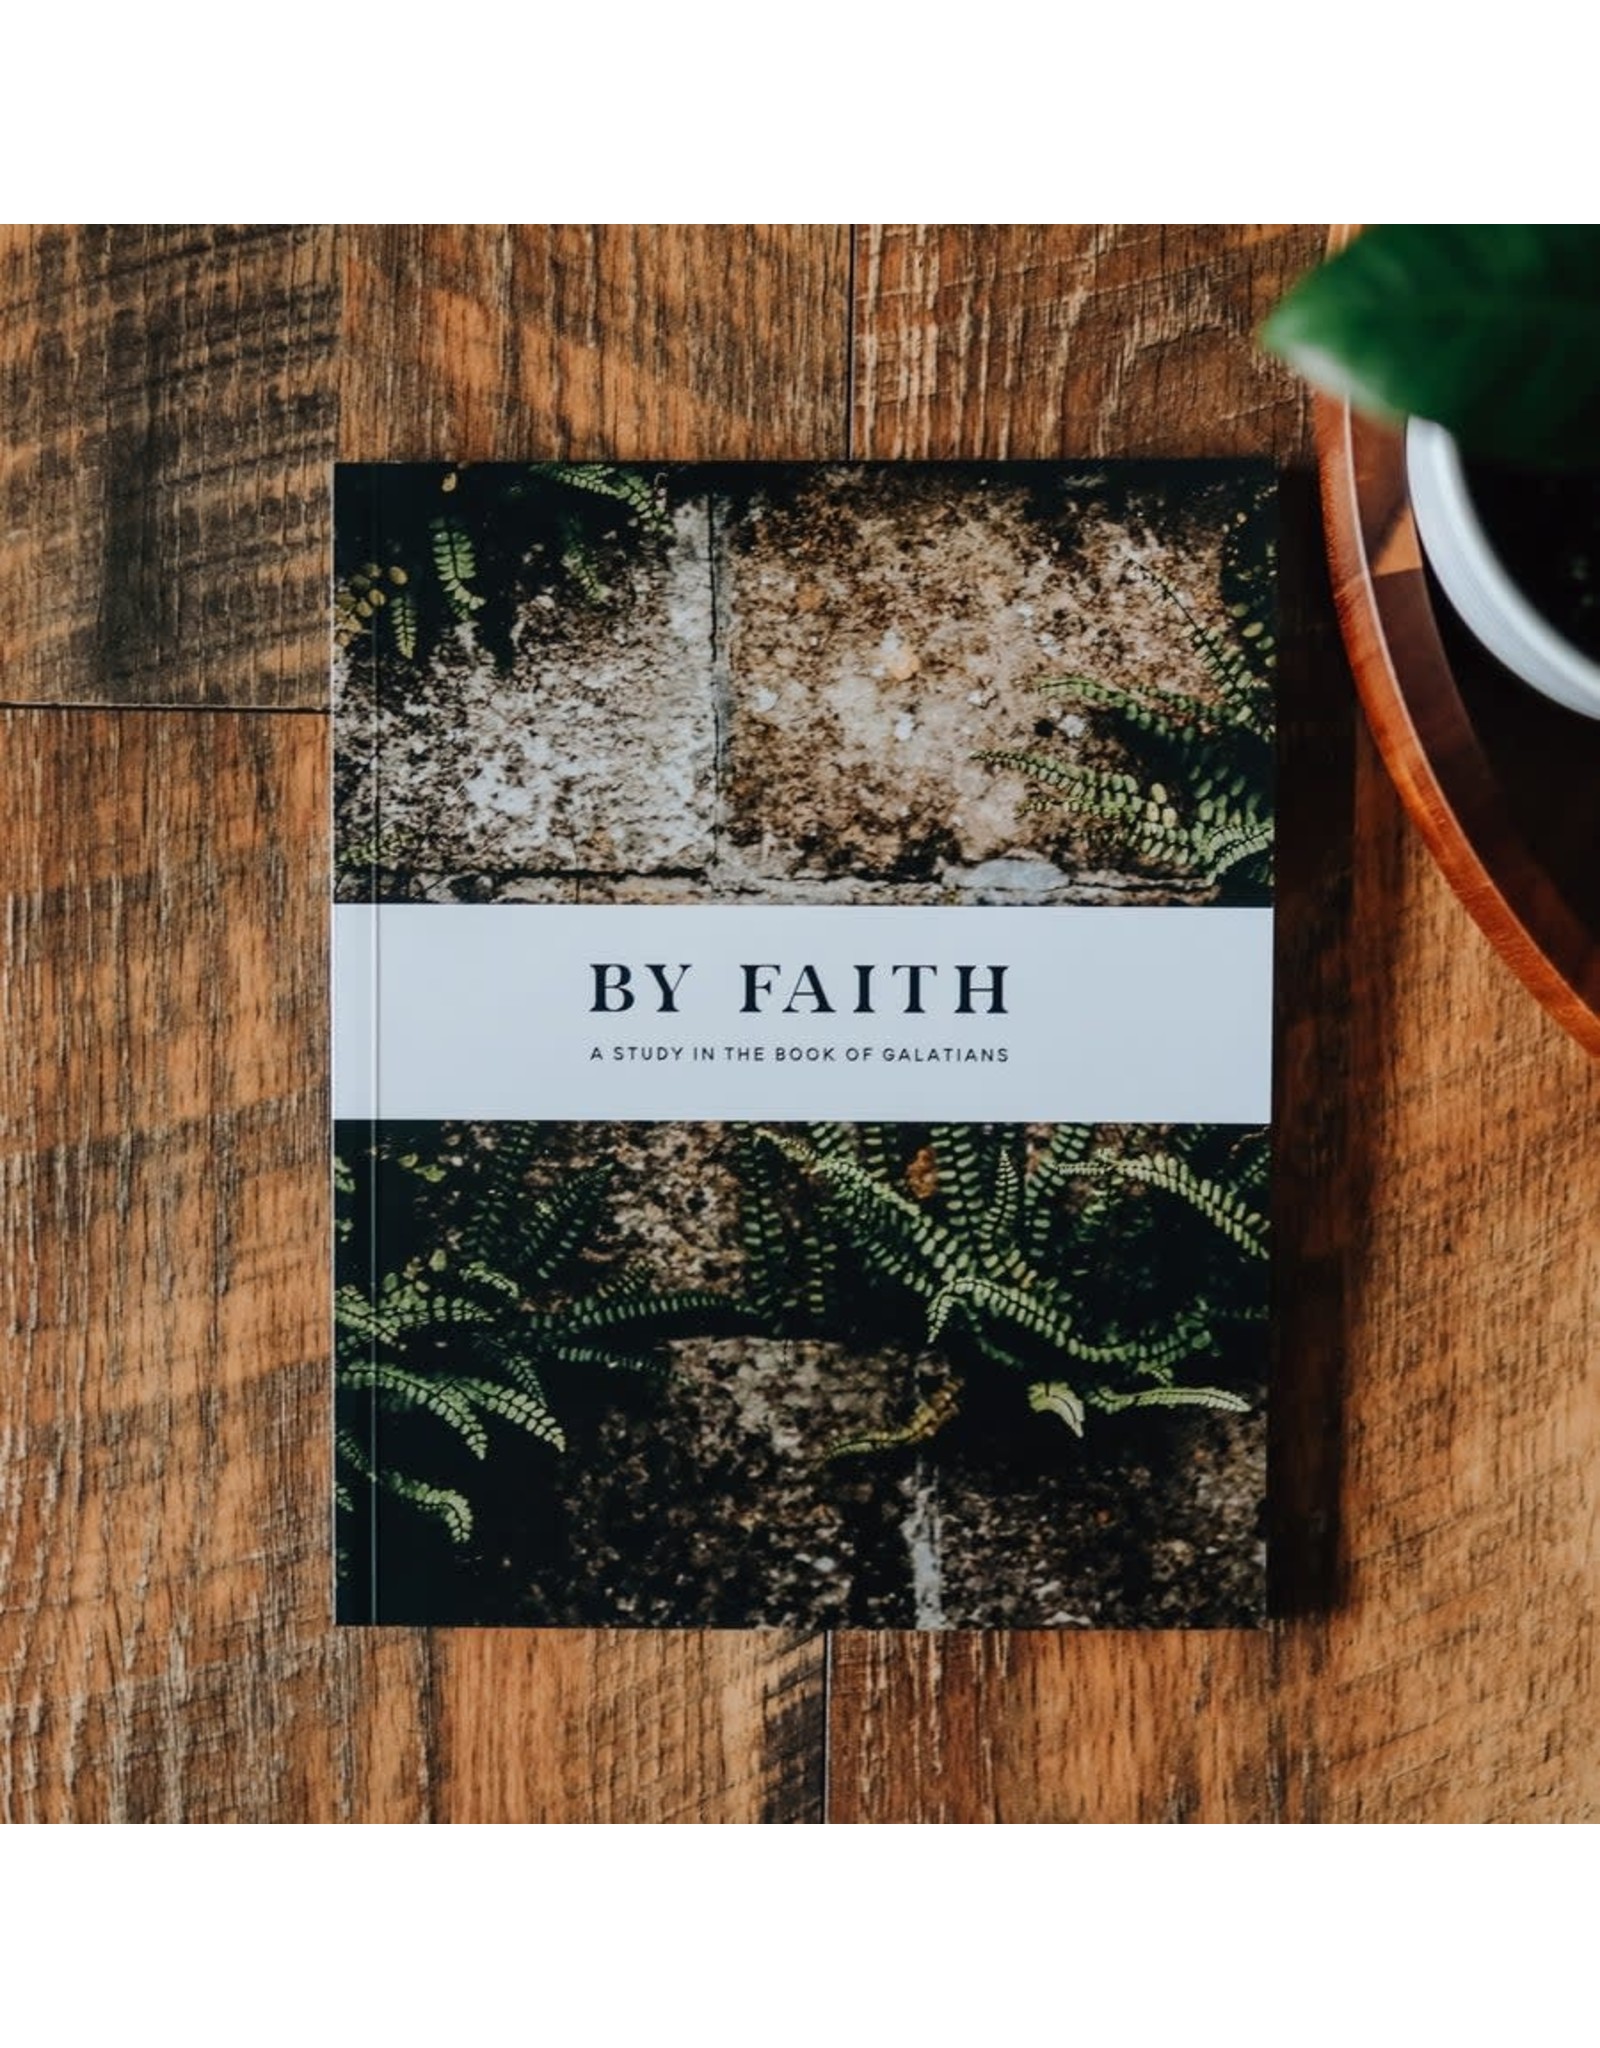 Book of Galatians "By Faith" Study for Men